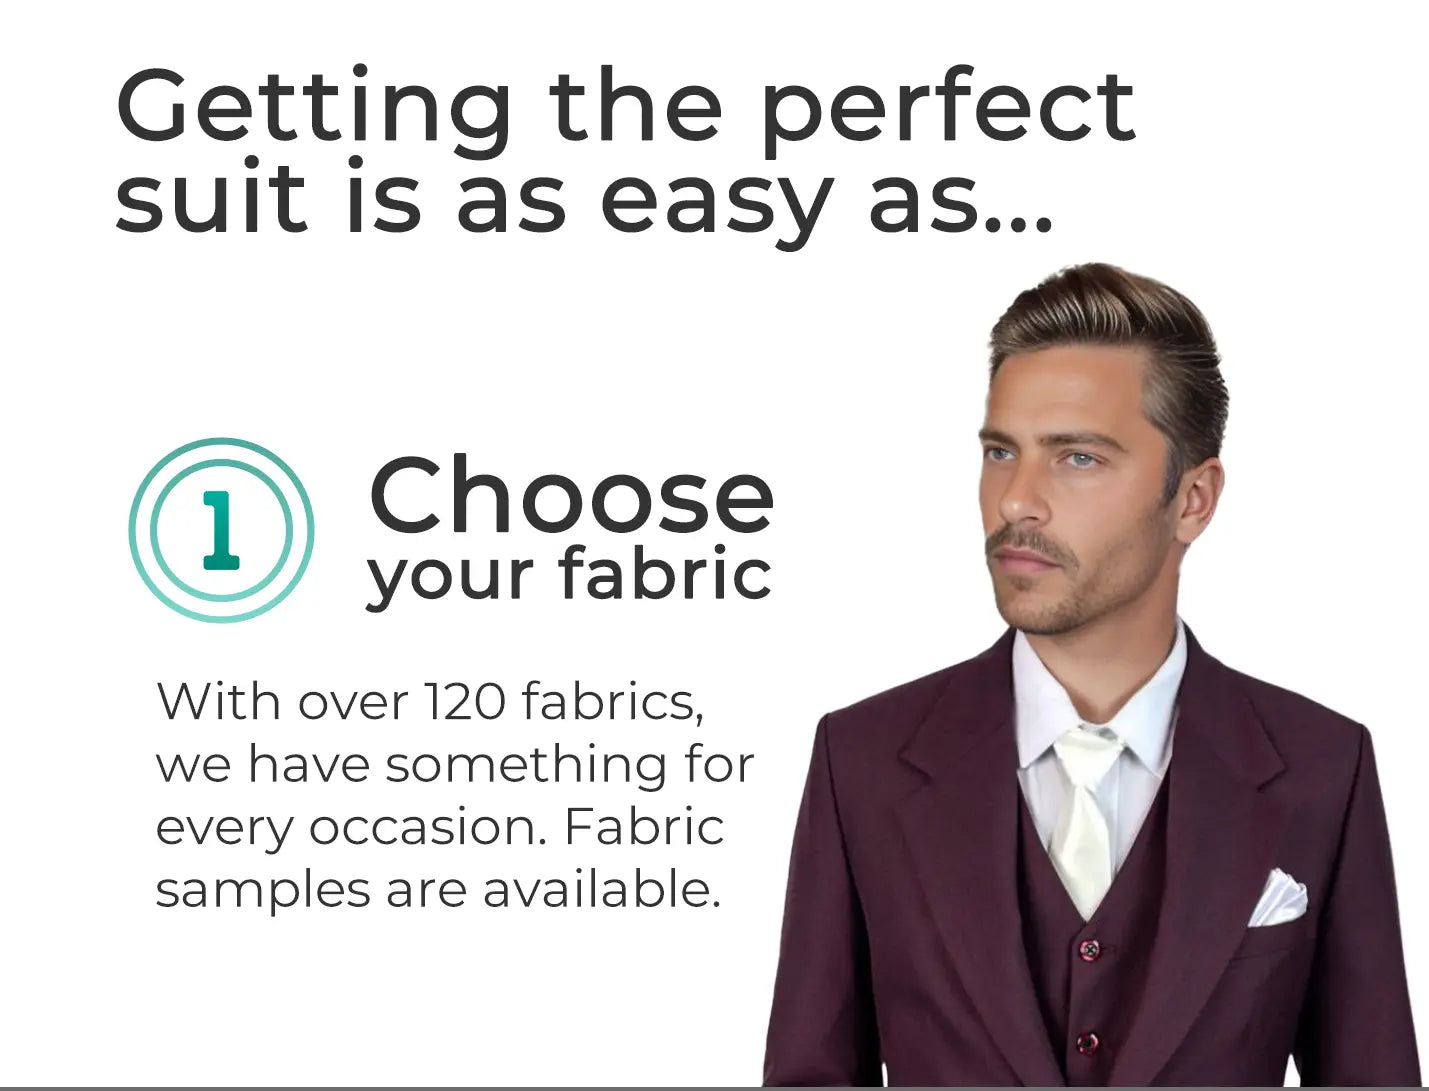 Getting the perfect suit is as easy as... step 1 - choose your fabric from over 120 in our collection.